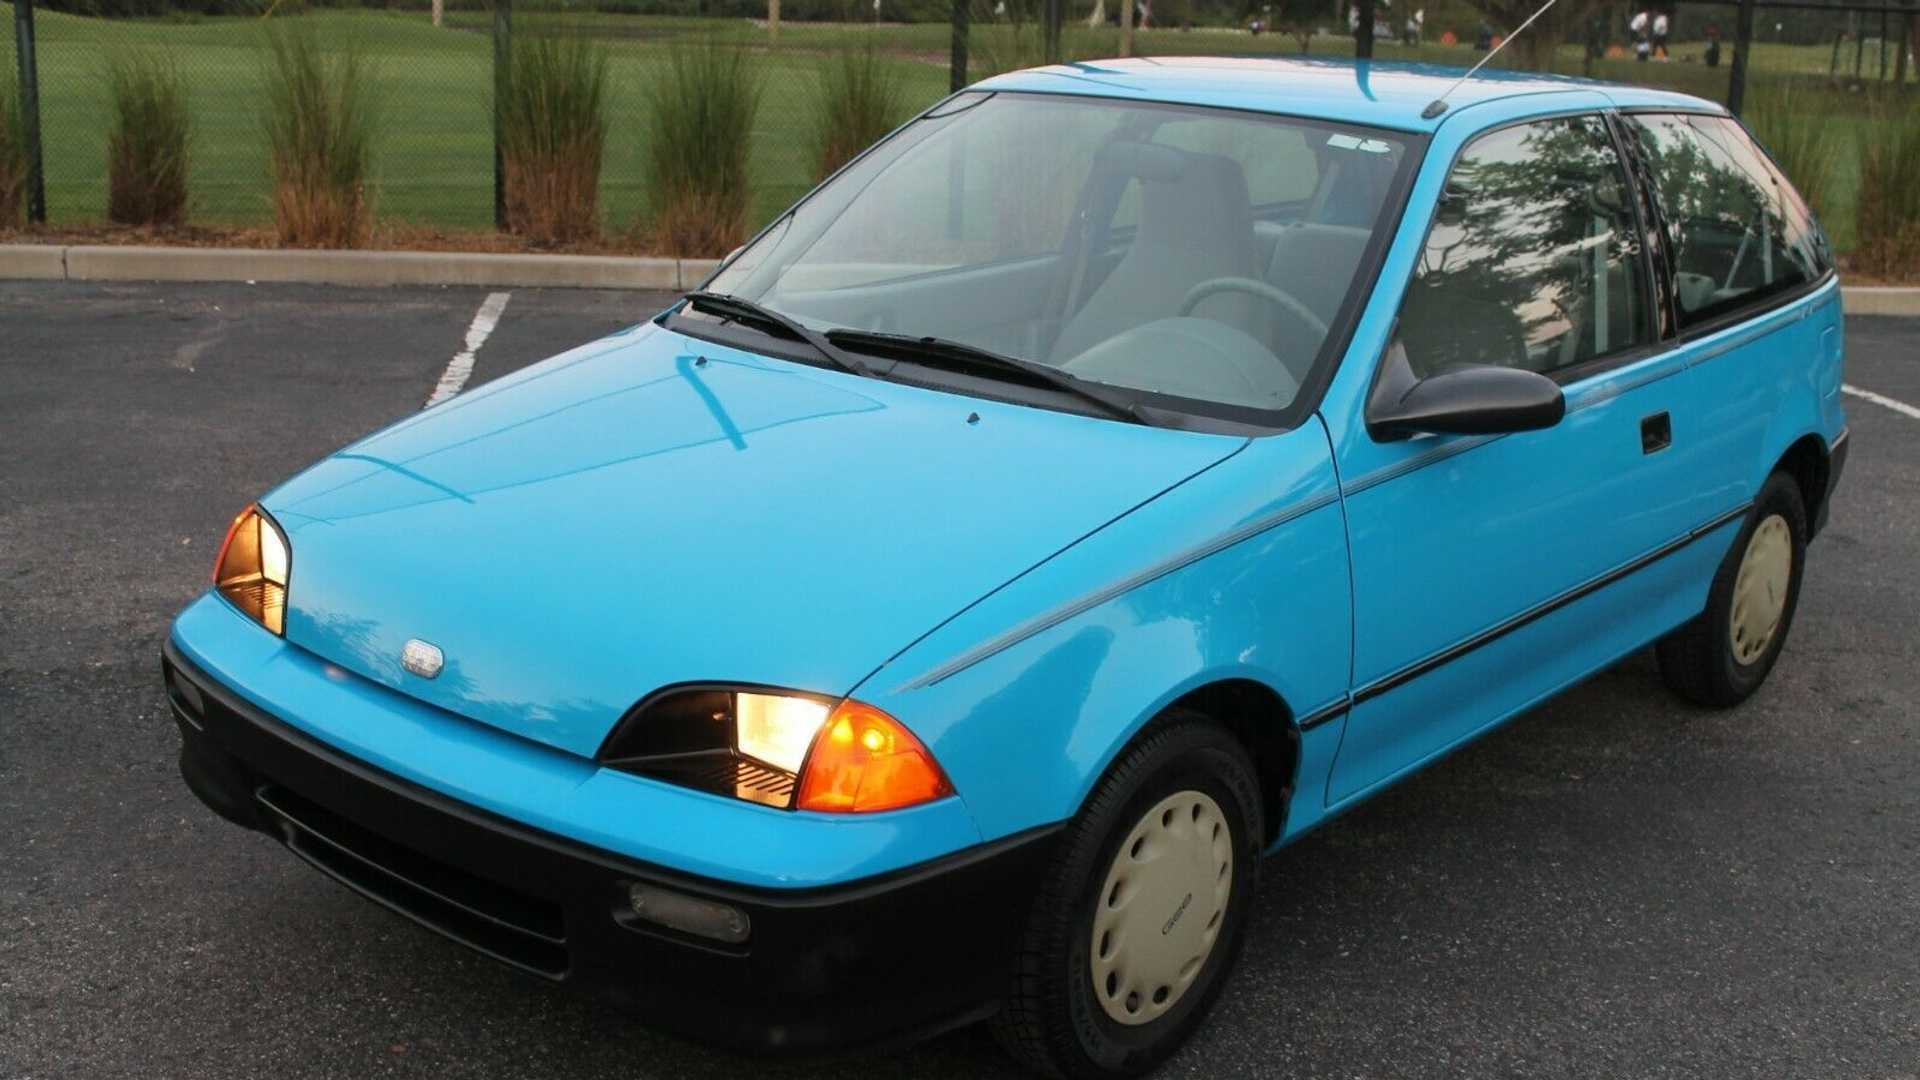 1993 Geo Metro In Pristine Condition Is The Nicest One We've Seen